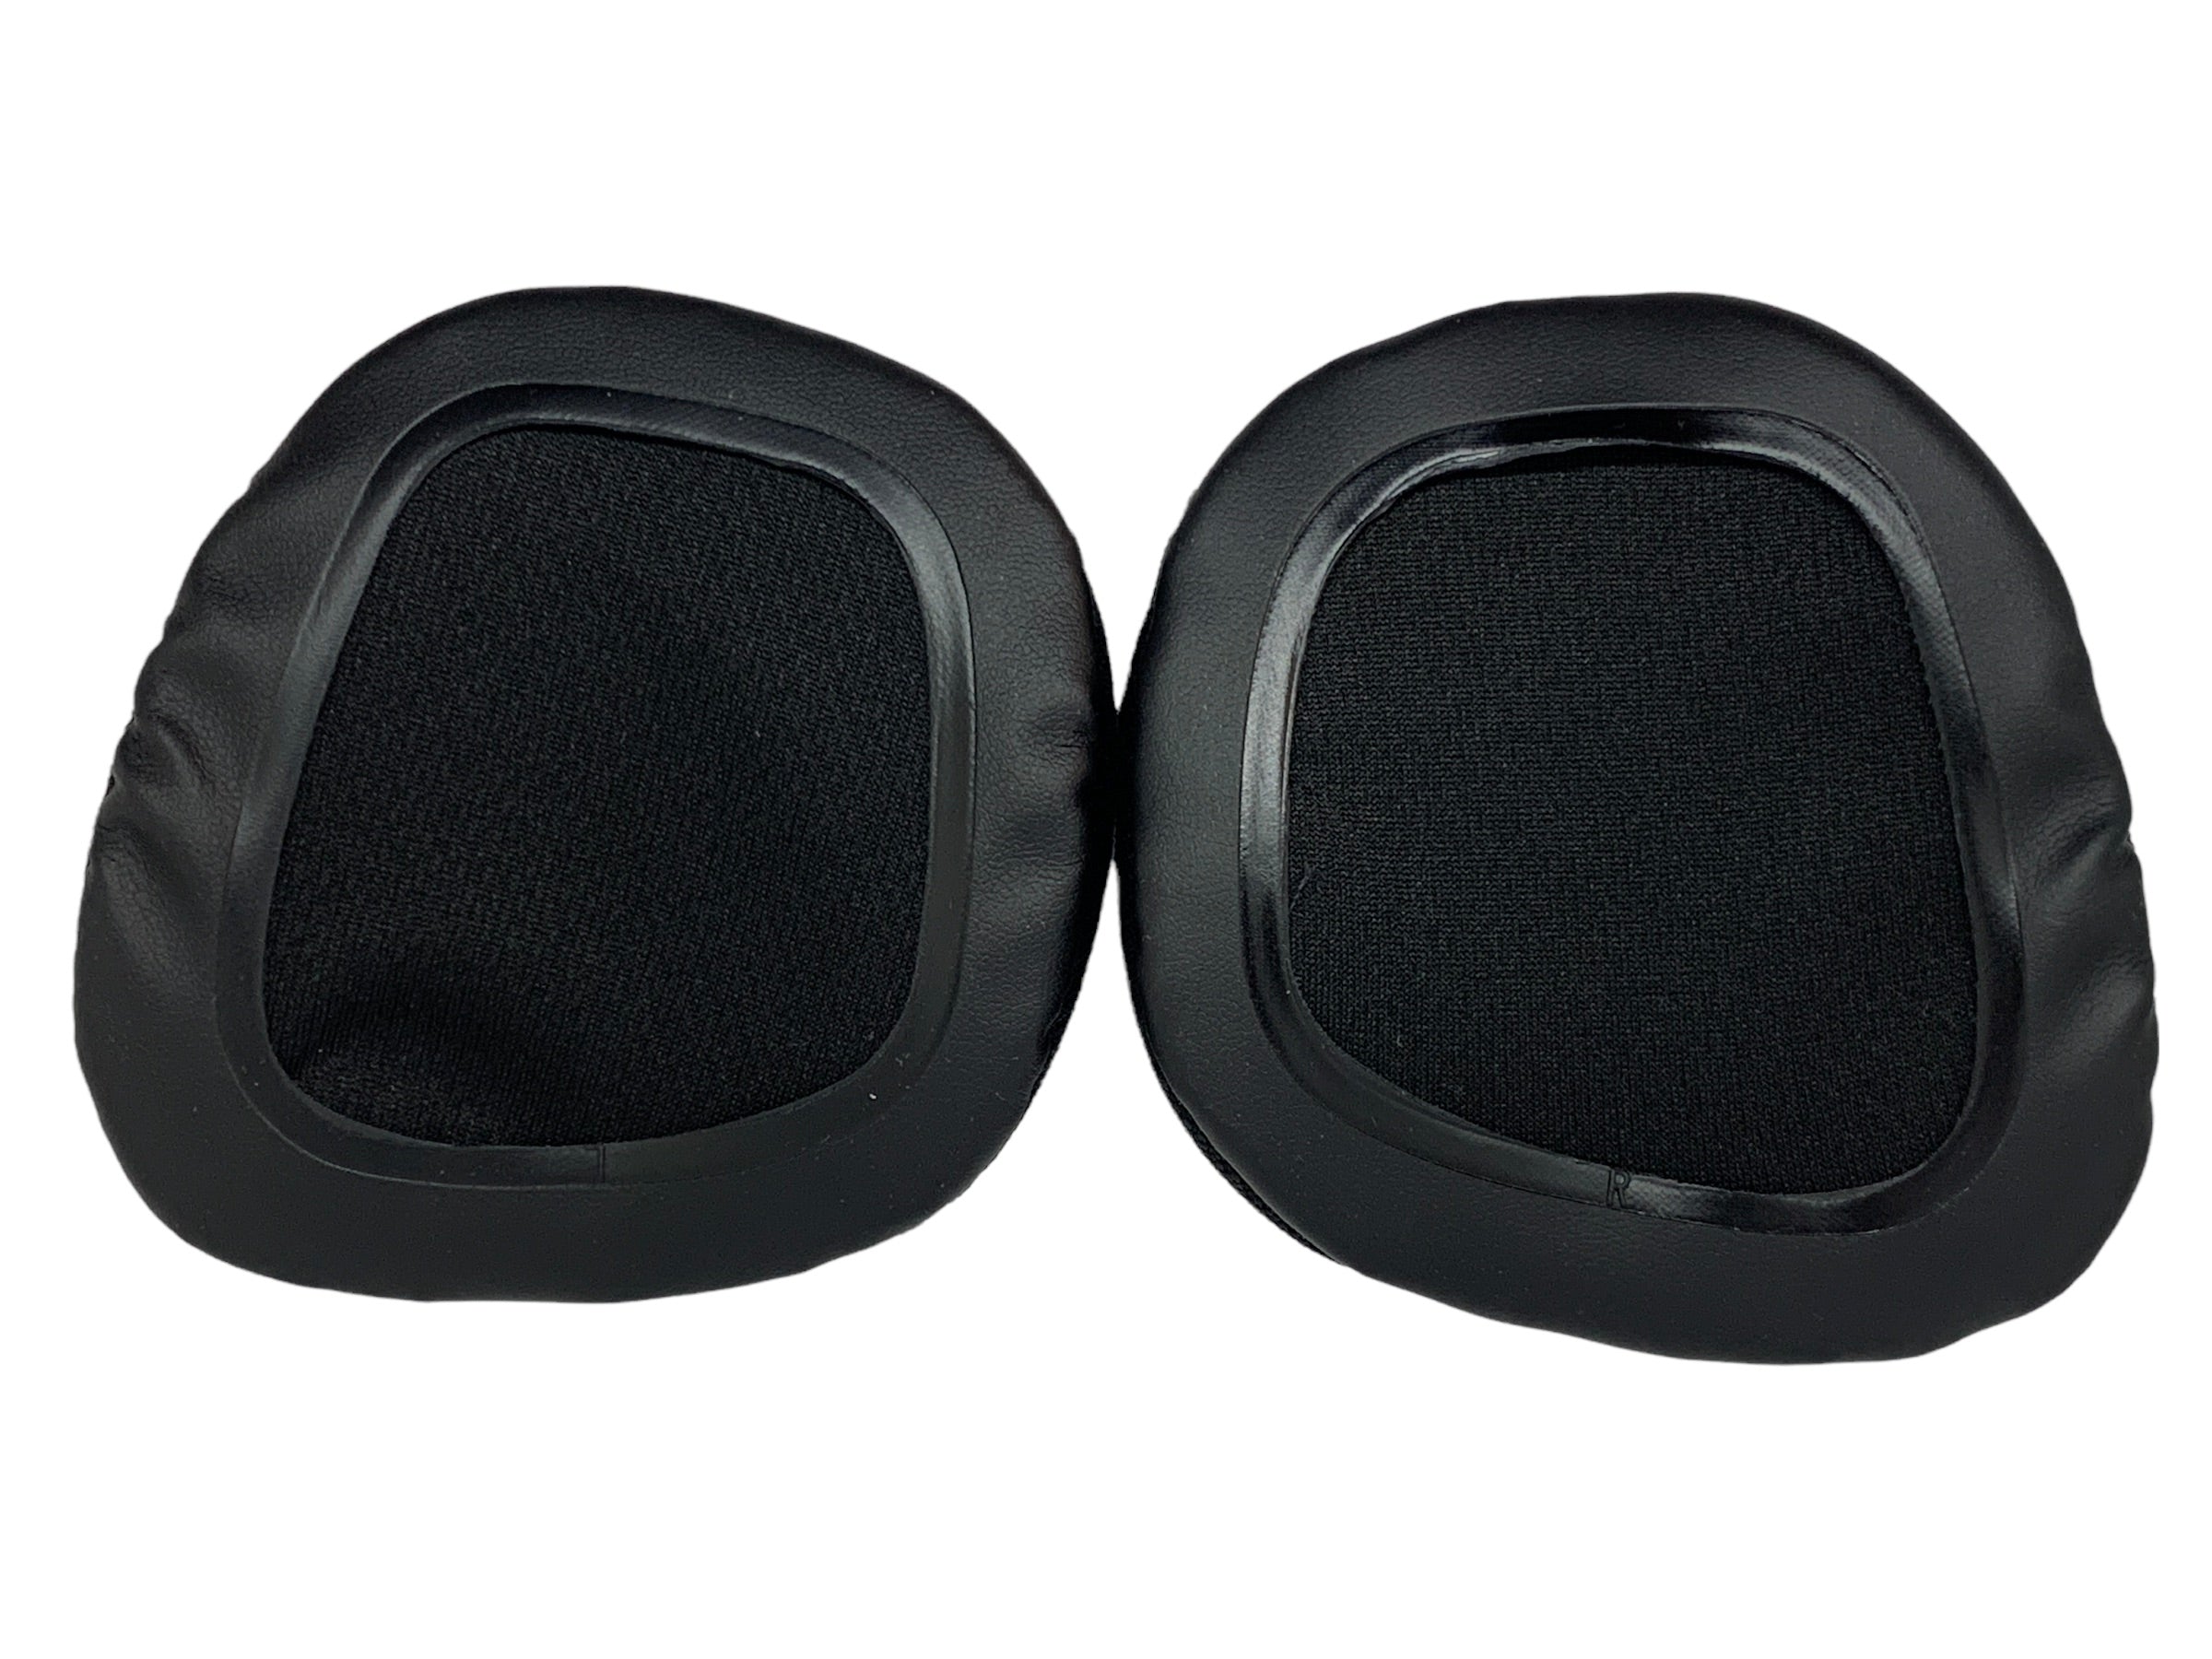 CentralSound Replacement Ear Pad Cushions Headband for Corsair VOID PRO Gaming Headset - CentralSound